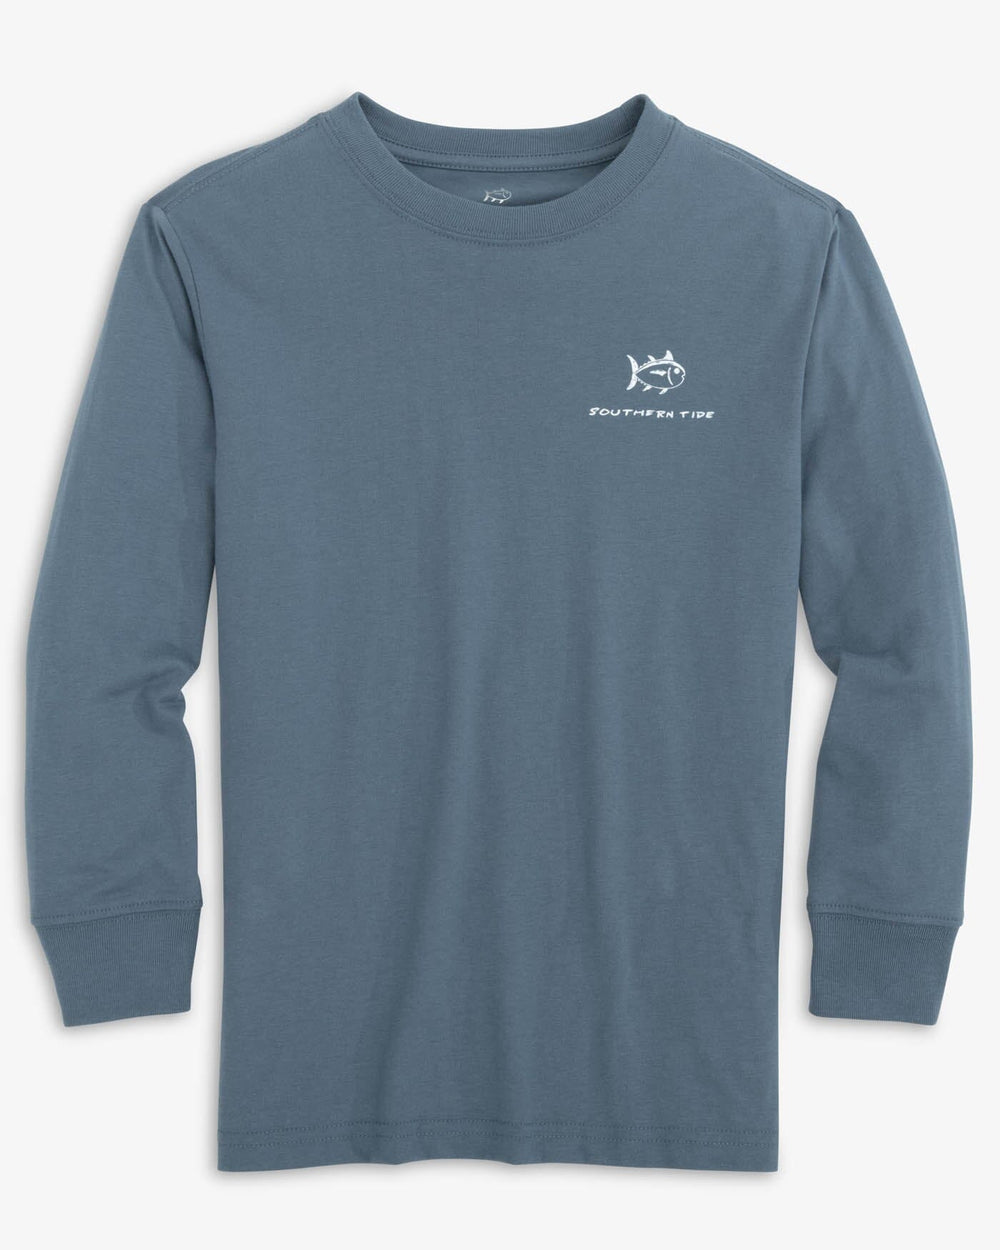 The front view of the Southern Tide Kids Jon Boat Fishing Long Sleeve T-Shirt by Southern Tide - Blue Haze